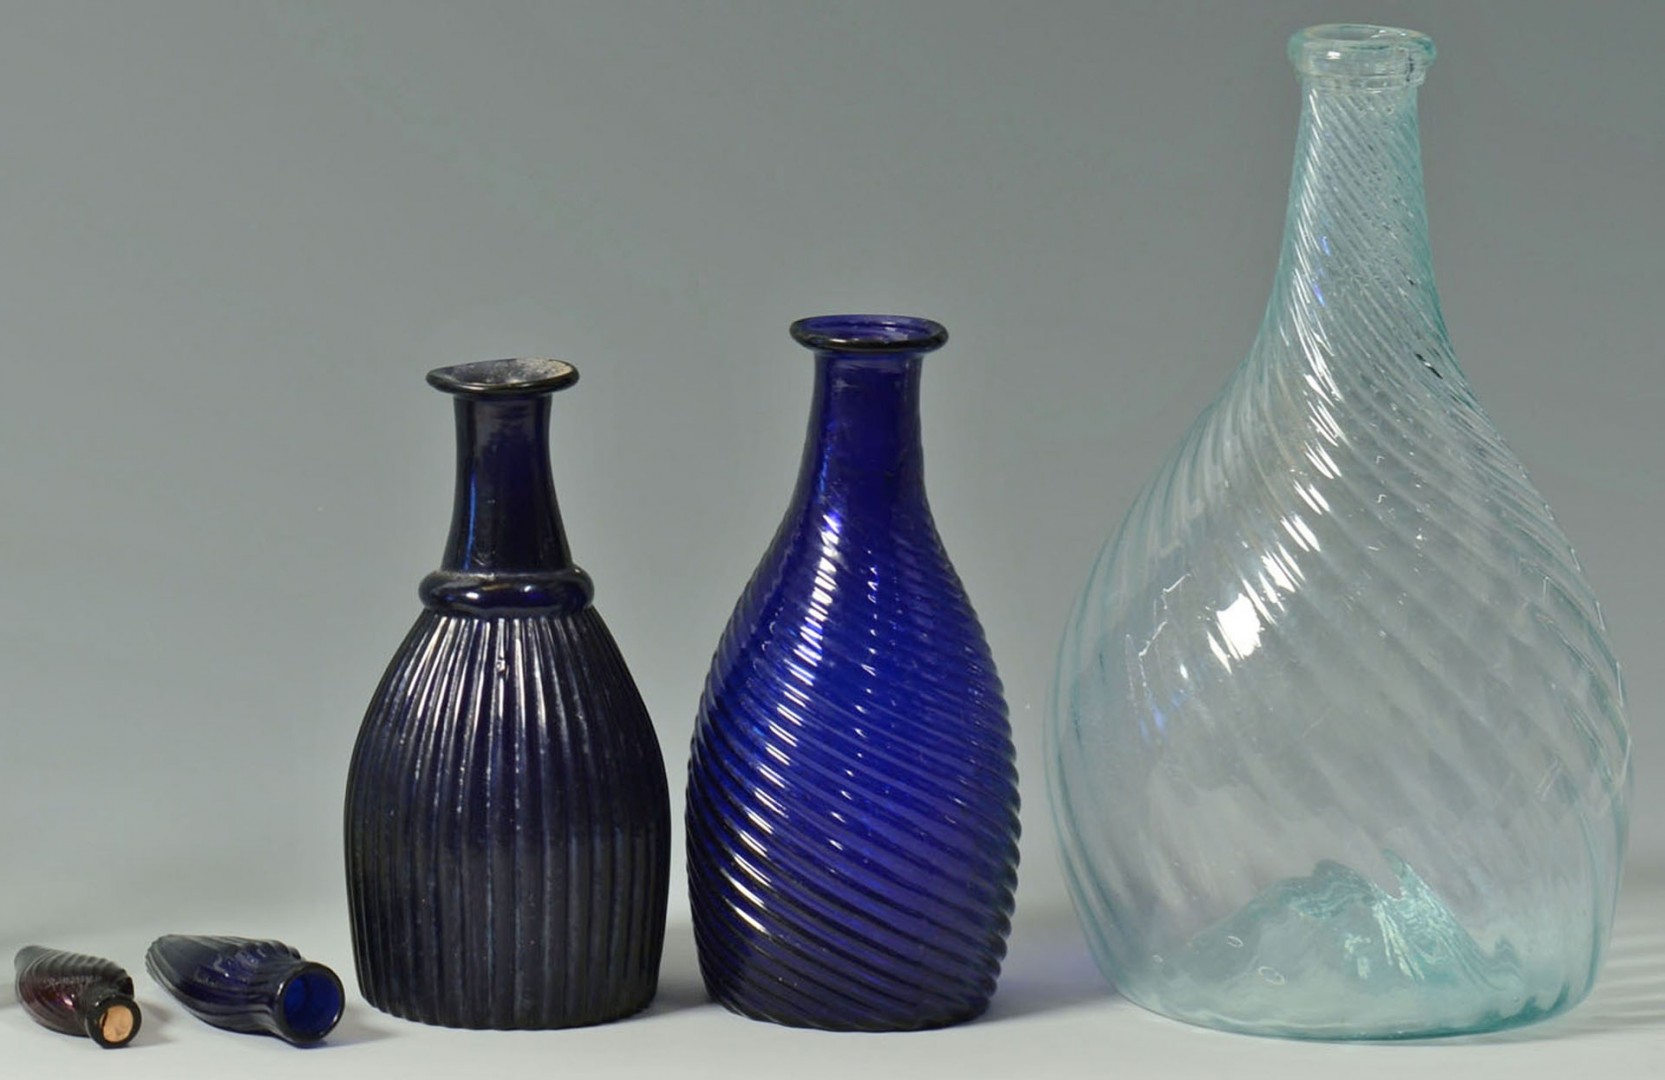 Lot 158: 10 blown colored glass bottles, many pitkin type